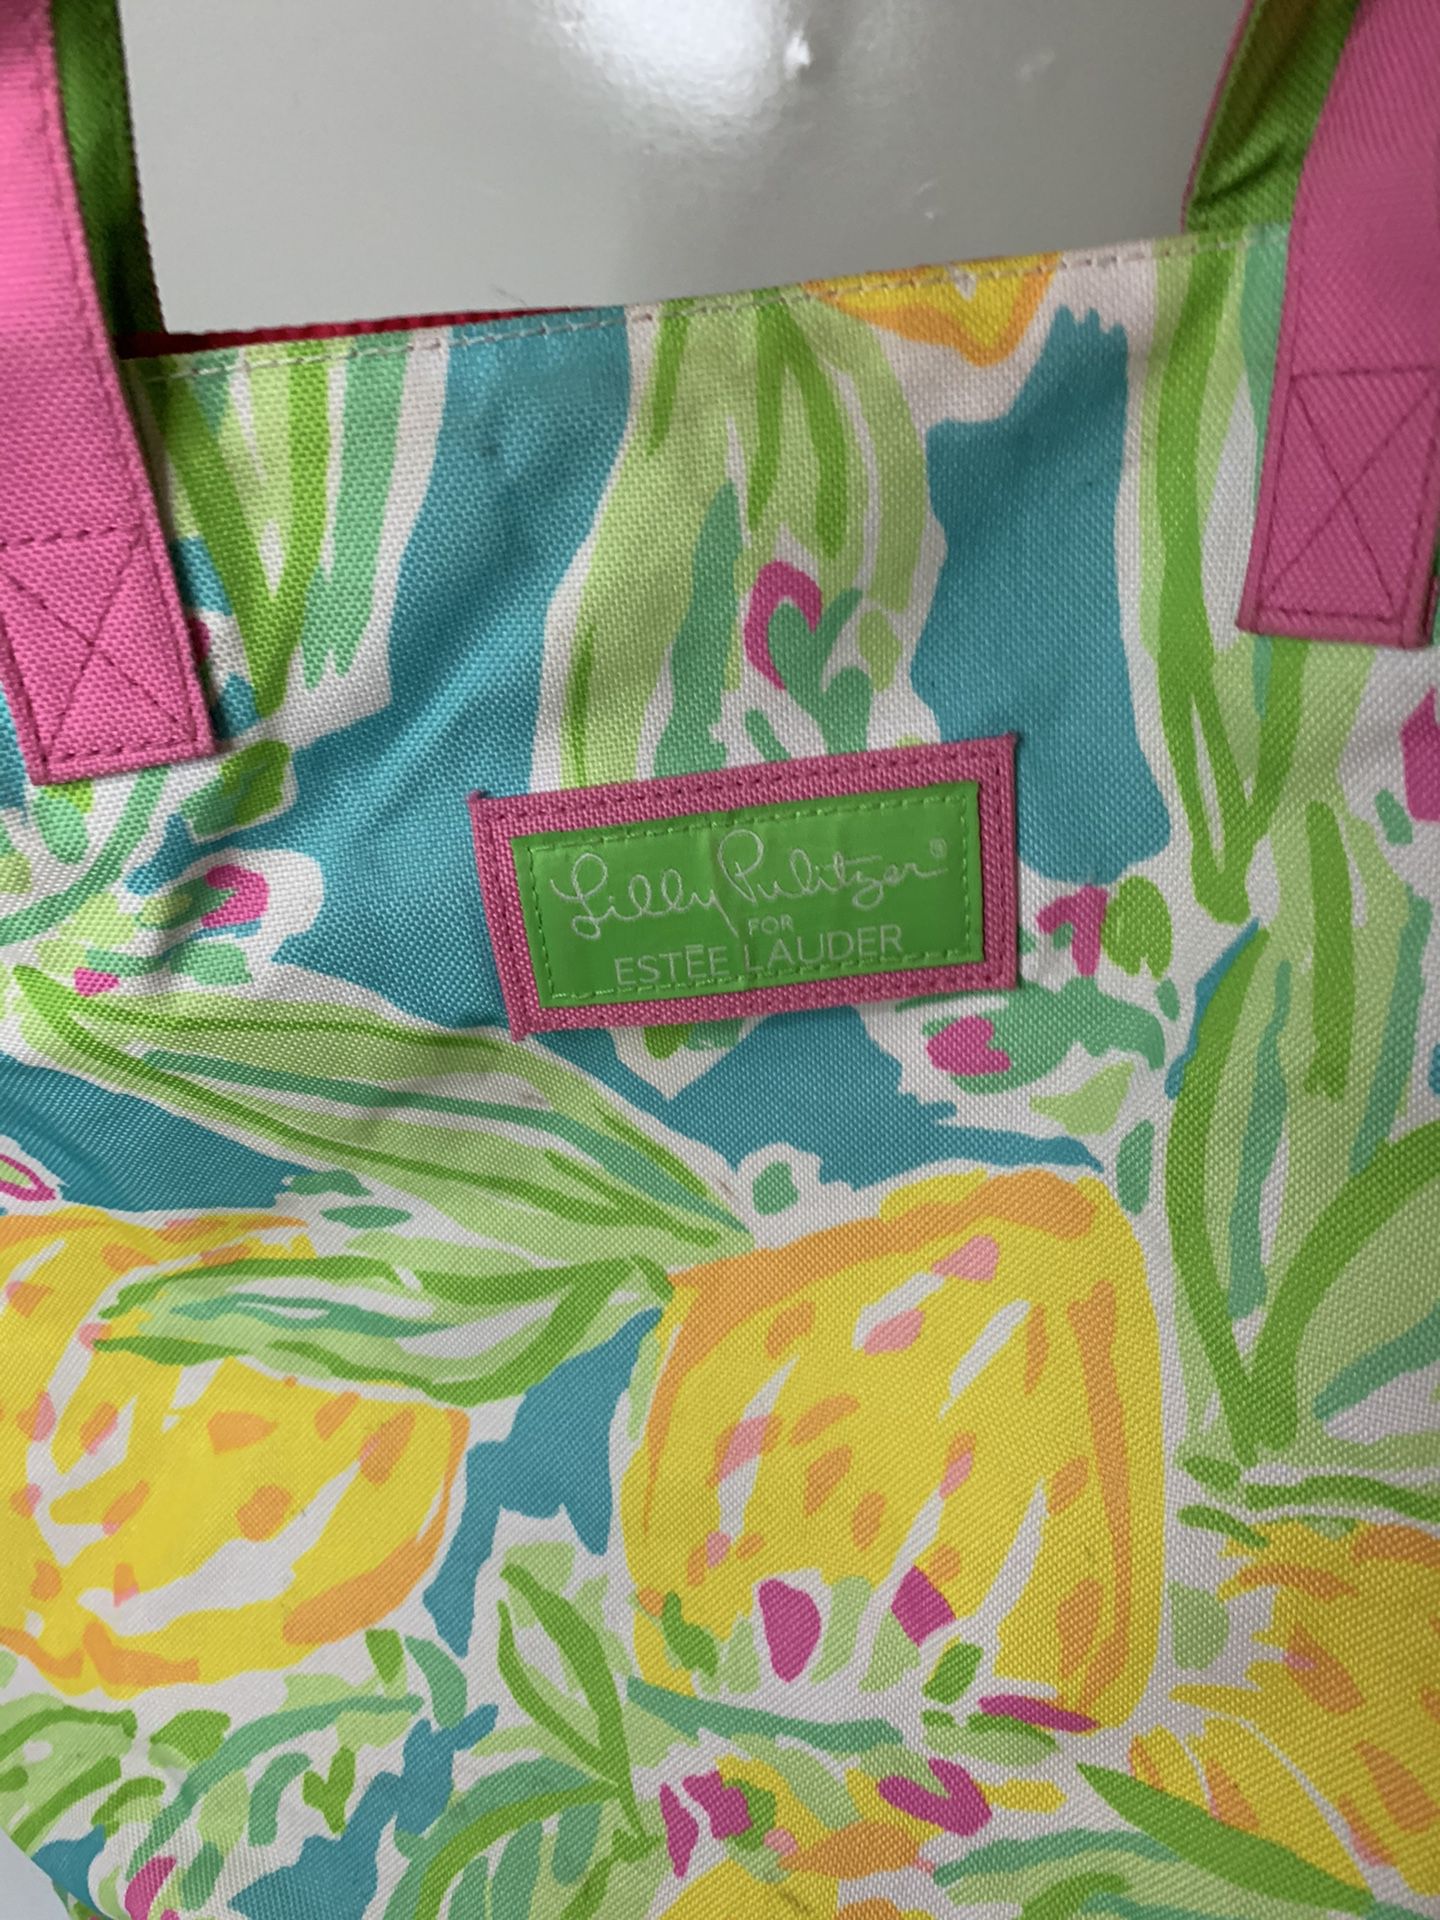 Lilly Pulitzer tote bag